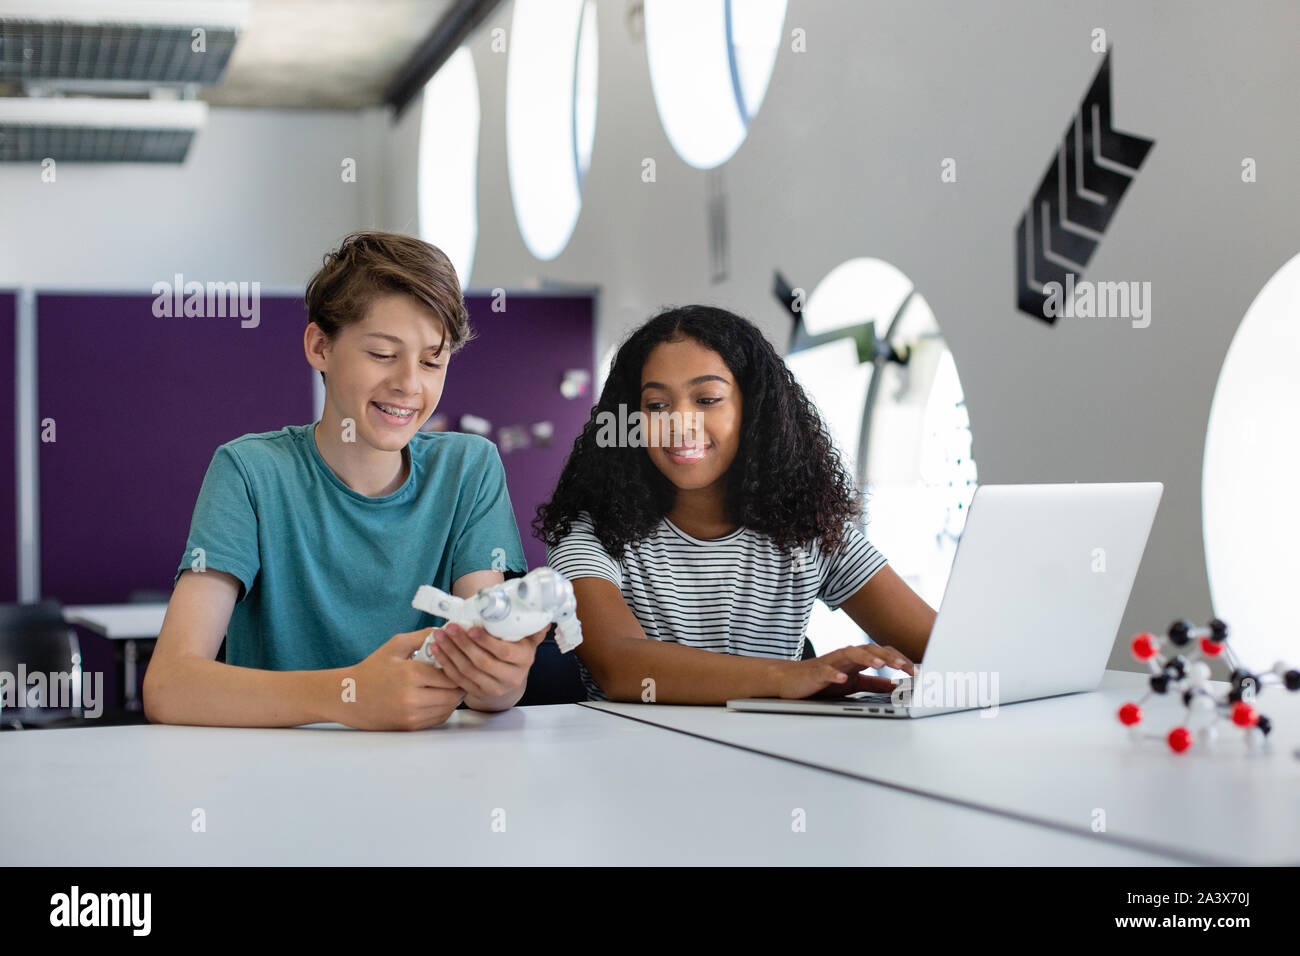 High school students in a STEM class Stock Photo